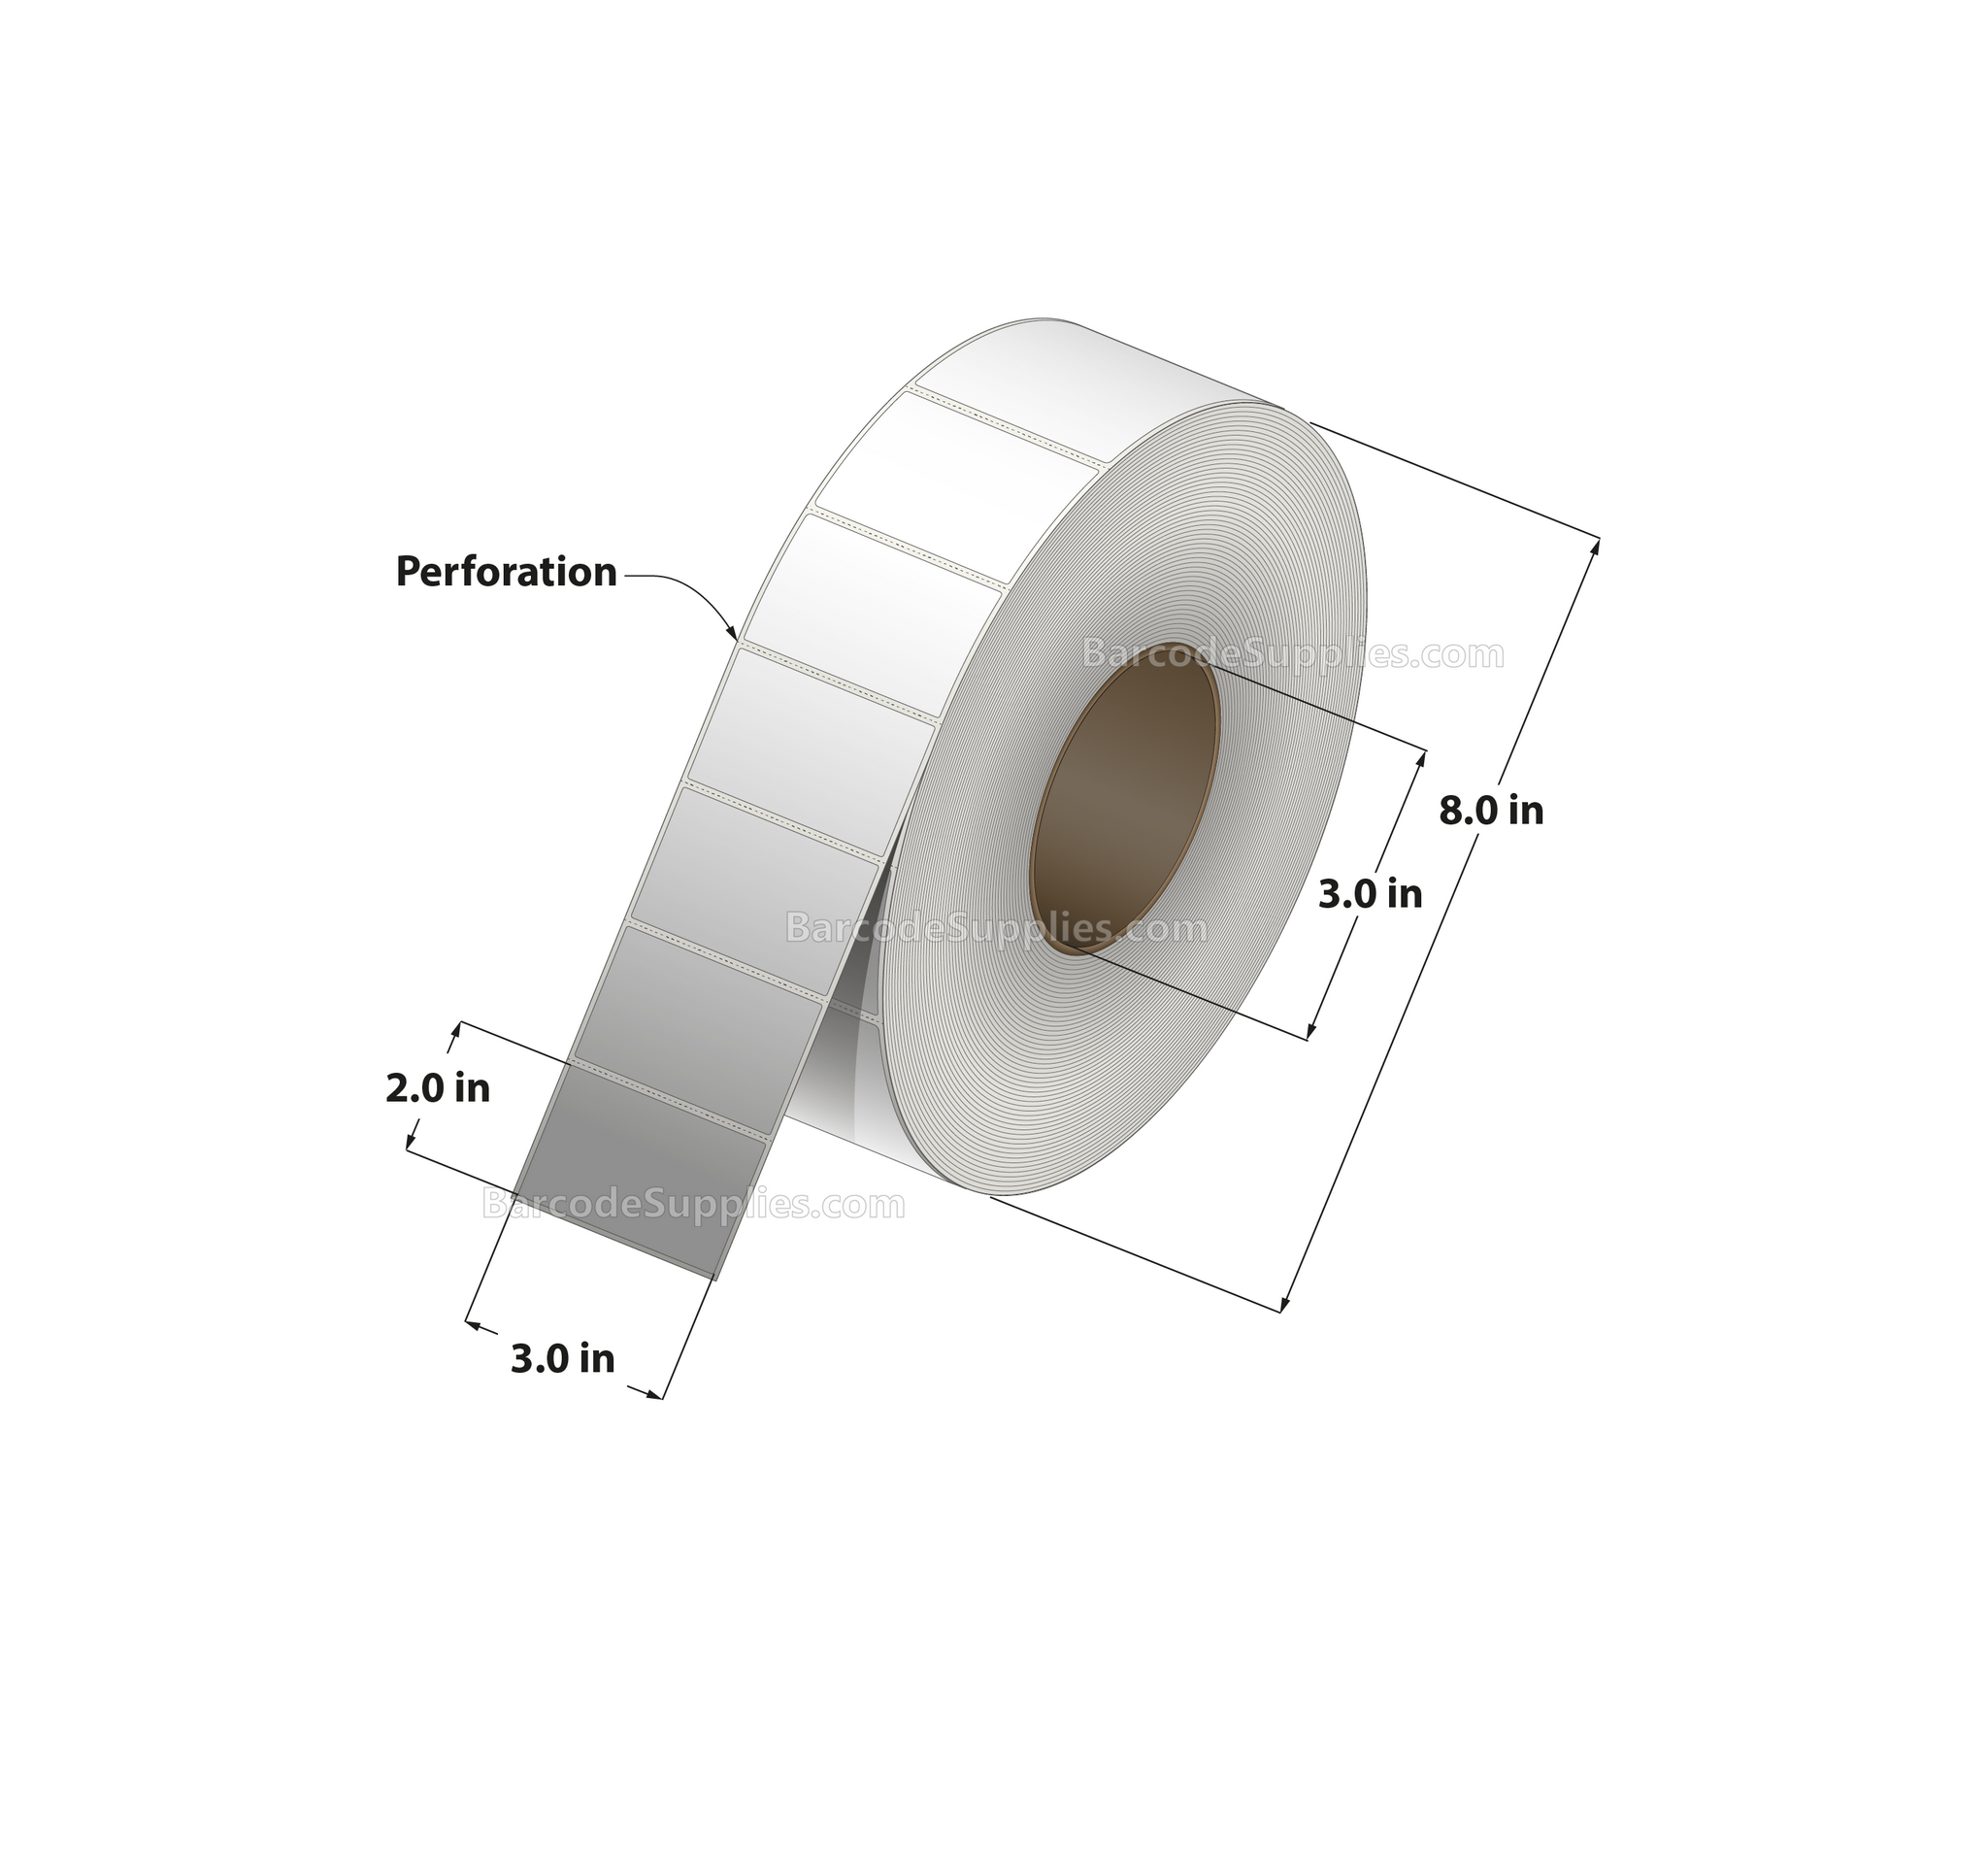 3 x 2 Direct Thermal White Labels With Acrylic Adhesive - Perforated - 2900 Labels Per Roll - Carton Of 8 Rolls - 23200 Labels Total - MPN: RD-3-2-2900-3 - BarcodeSource, Inc.